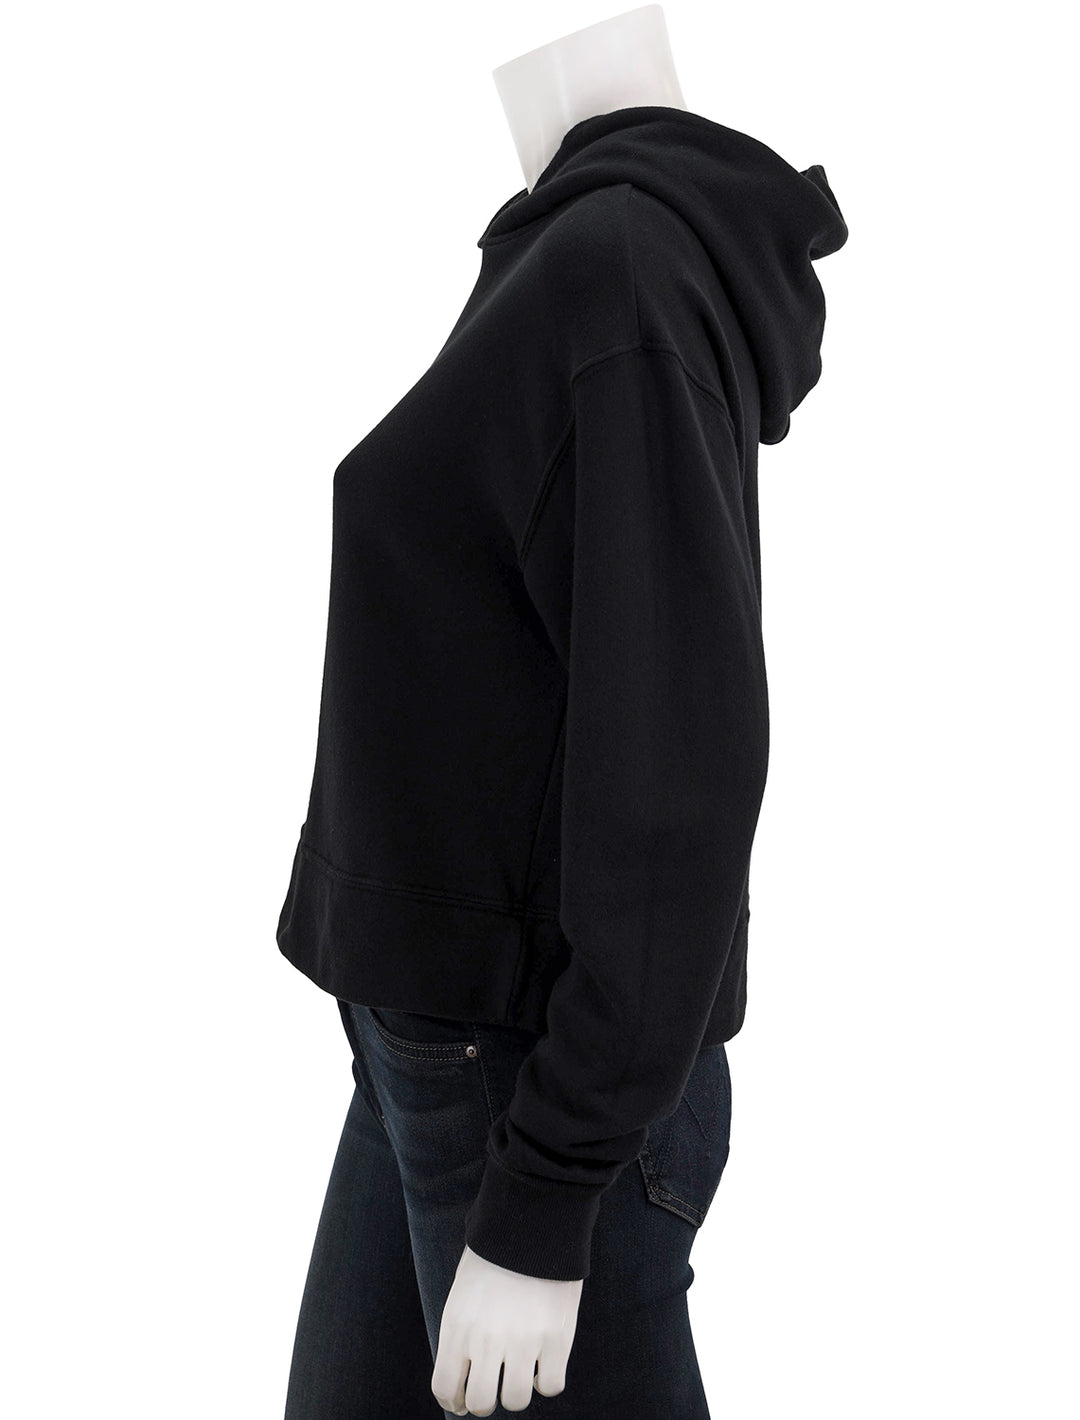 Side view of Perfectwhitetee's iggy hoodie in true black.